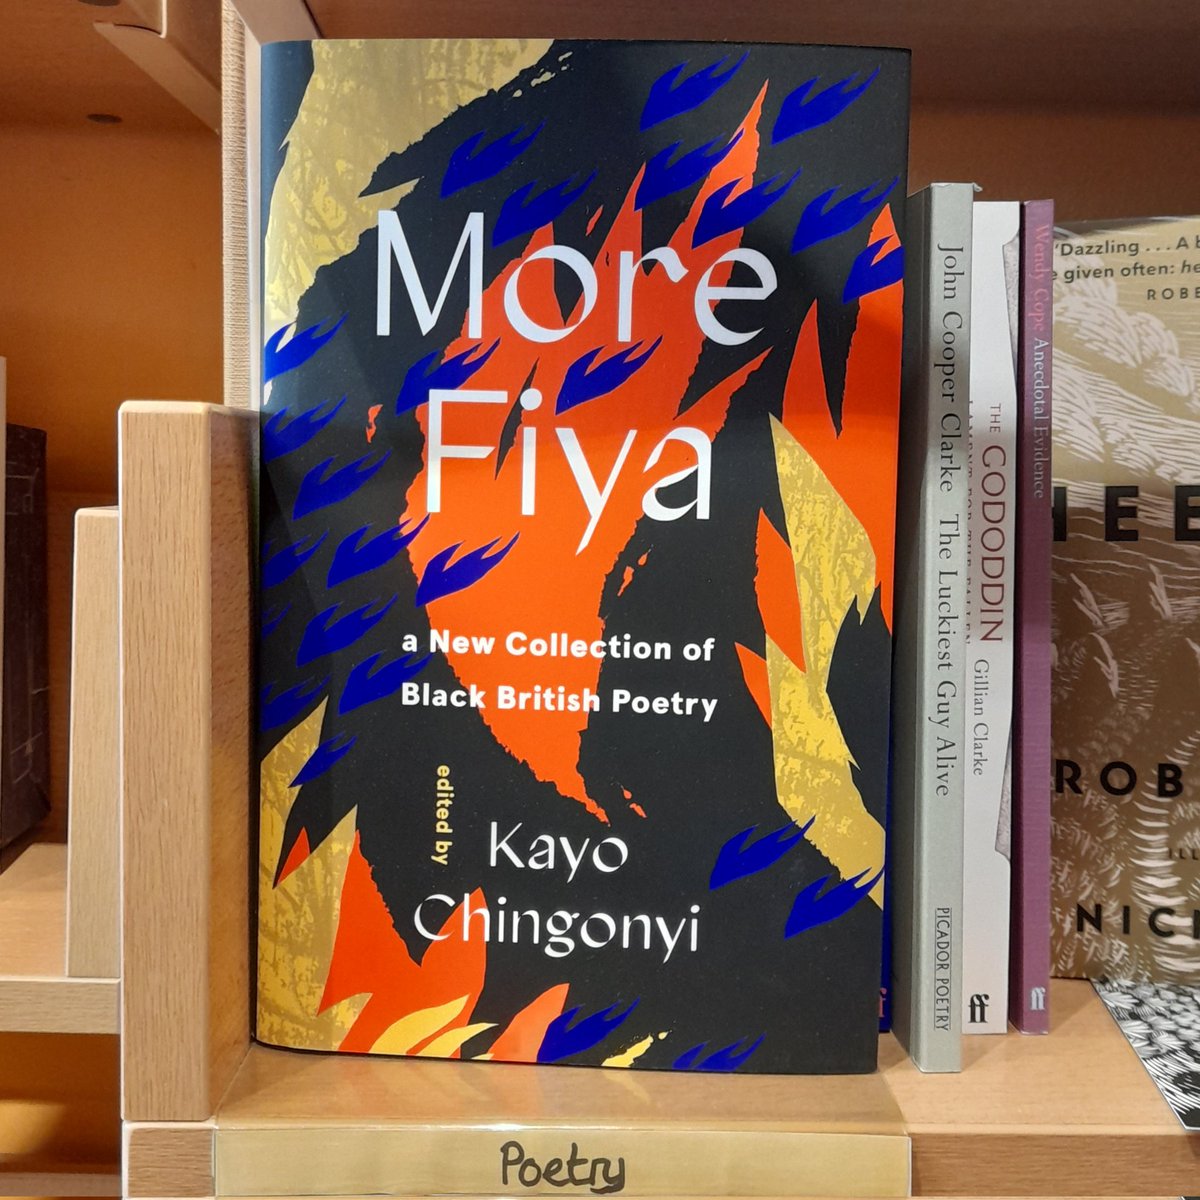 Look what I found on the shelves of the legendary @bookshopbridprt Hot off the press @canongatebooks #MoreFiya anthology.  
Buy it 
Read it
Come hear us read from it @bristolideas @ArnolfiniArts 
Thurs June 23rd  Kayo Chingonyi, @Vanessa_Kisuule, @yomadene Nagelle Charles and me!